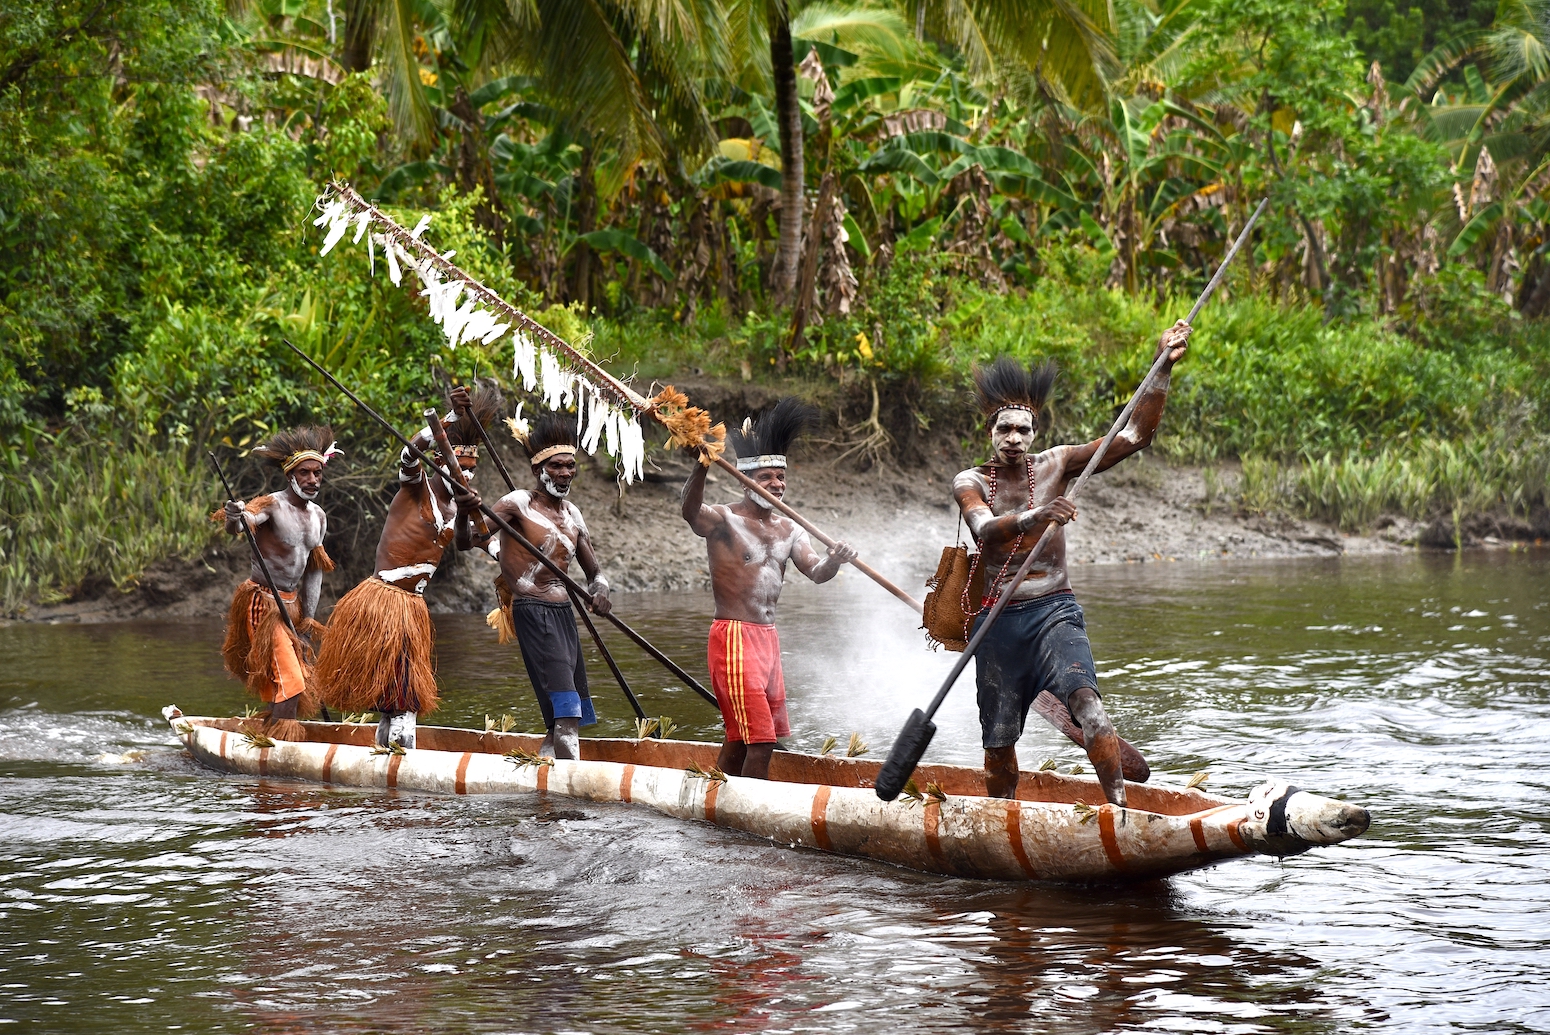 Asmat warriors in a dugout canoe at the village of Omanasep. Photo by Pierre Constant